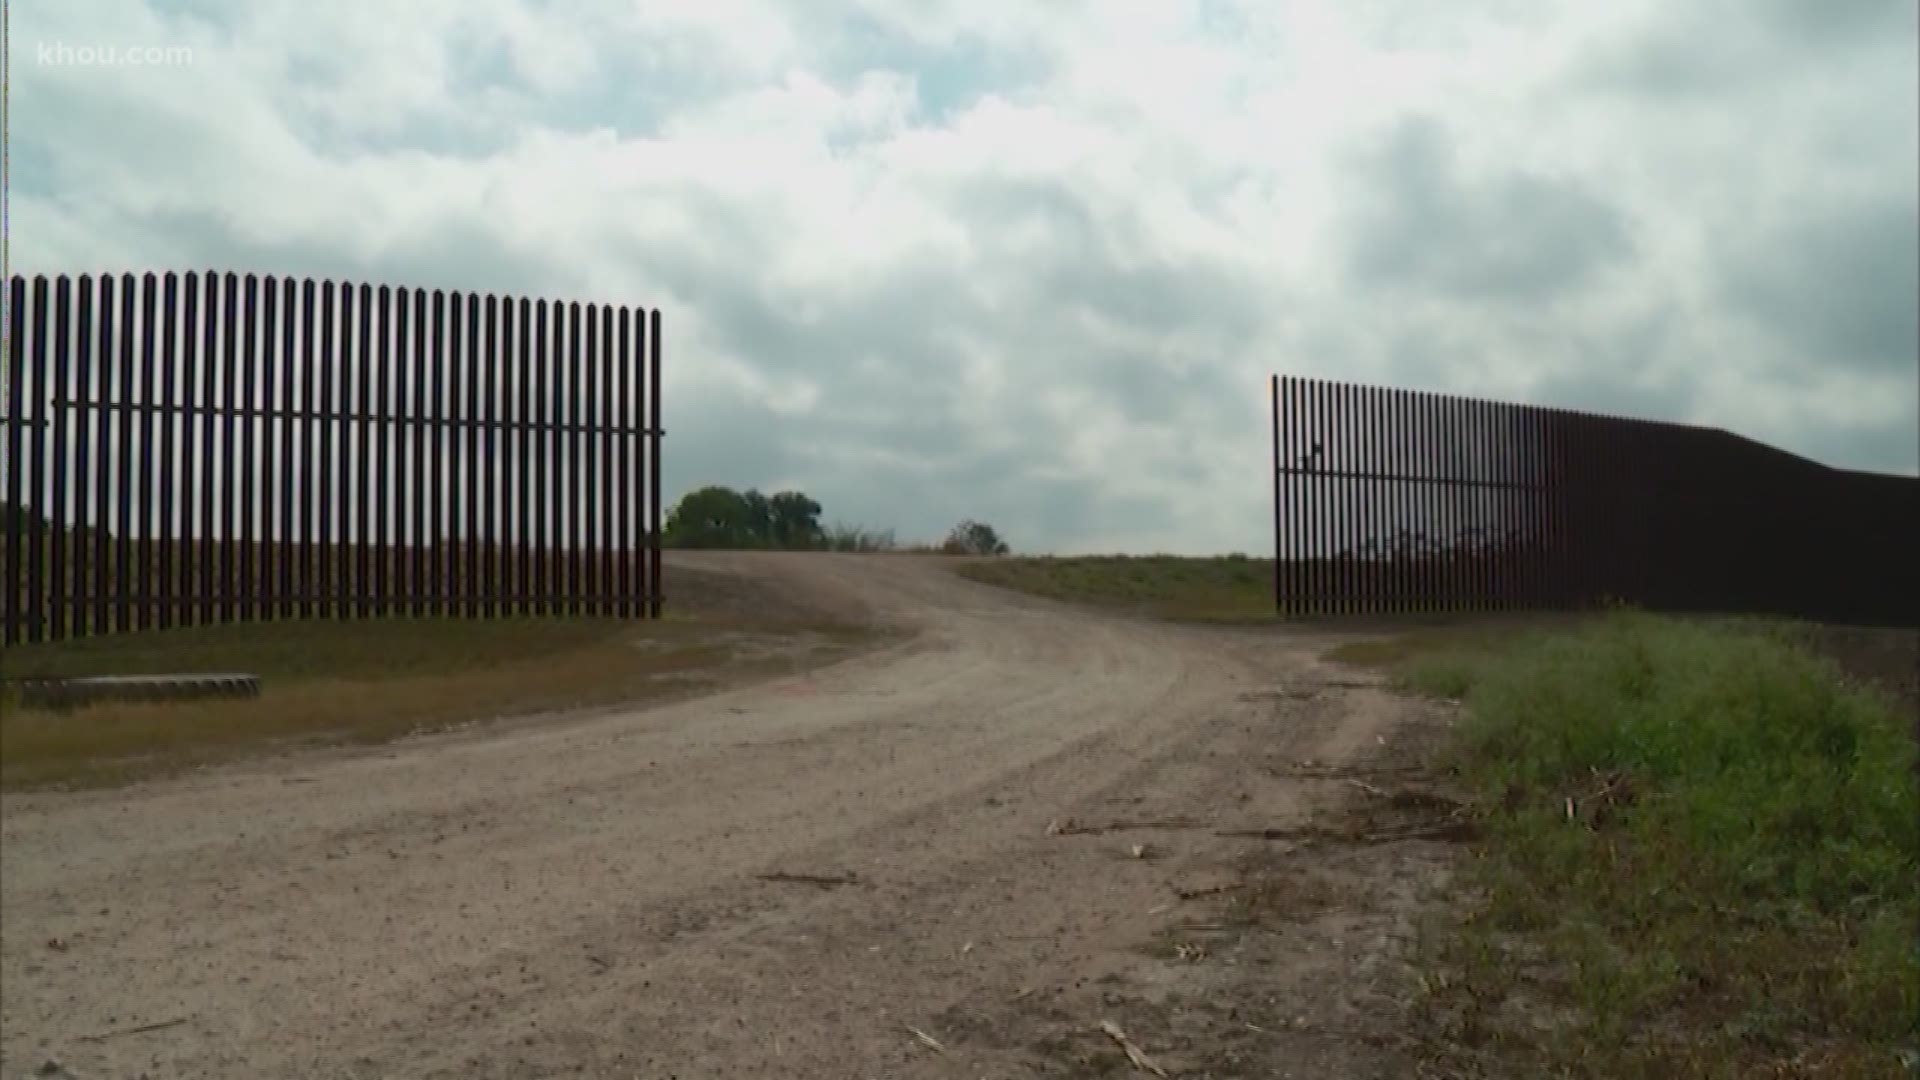 A KHOU 11 viewer wanted our Verify team to look into whether it really would take 10 to 15 years to build a border wall.